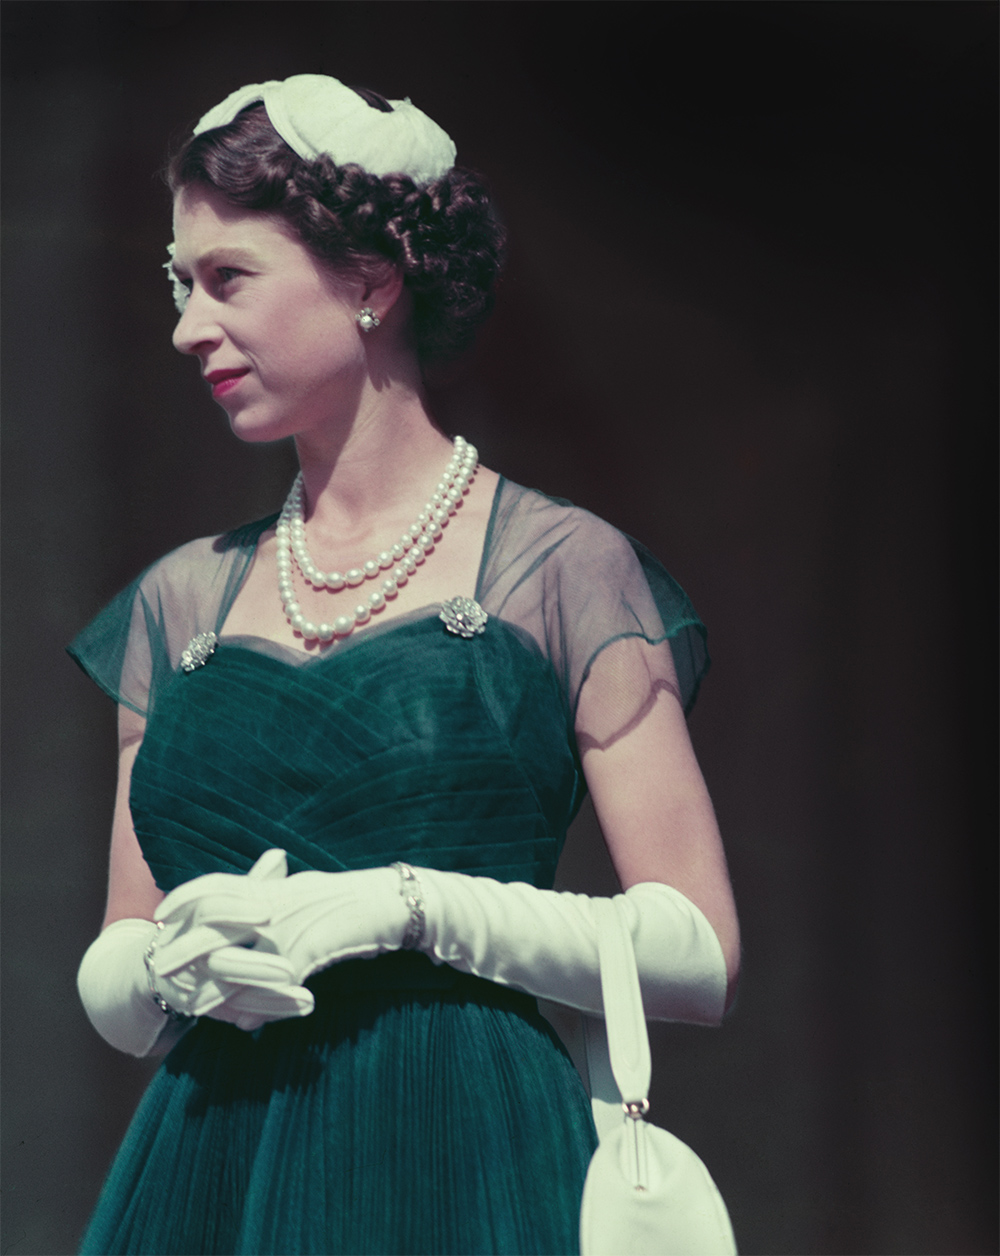 Queen Elizabeth II on the balcony of Government House, Melbourne wearing a deep green velvet dress with sheer cap sleeves during her tour of Australia in March 1954. Photo / Getty Images